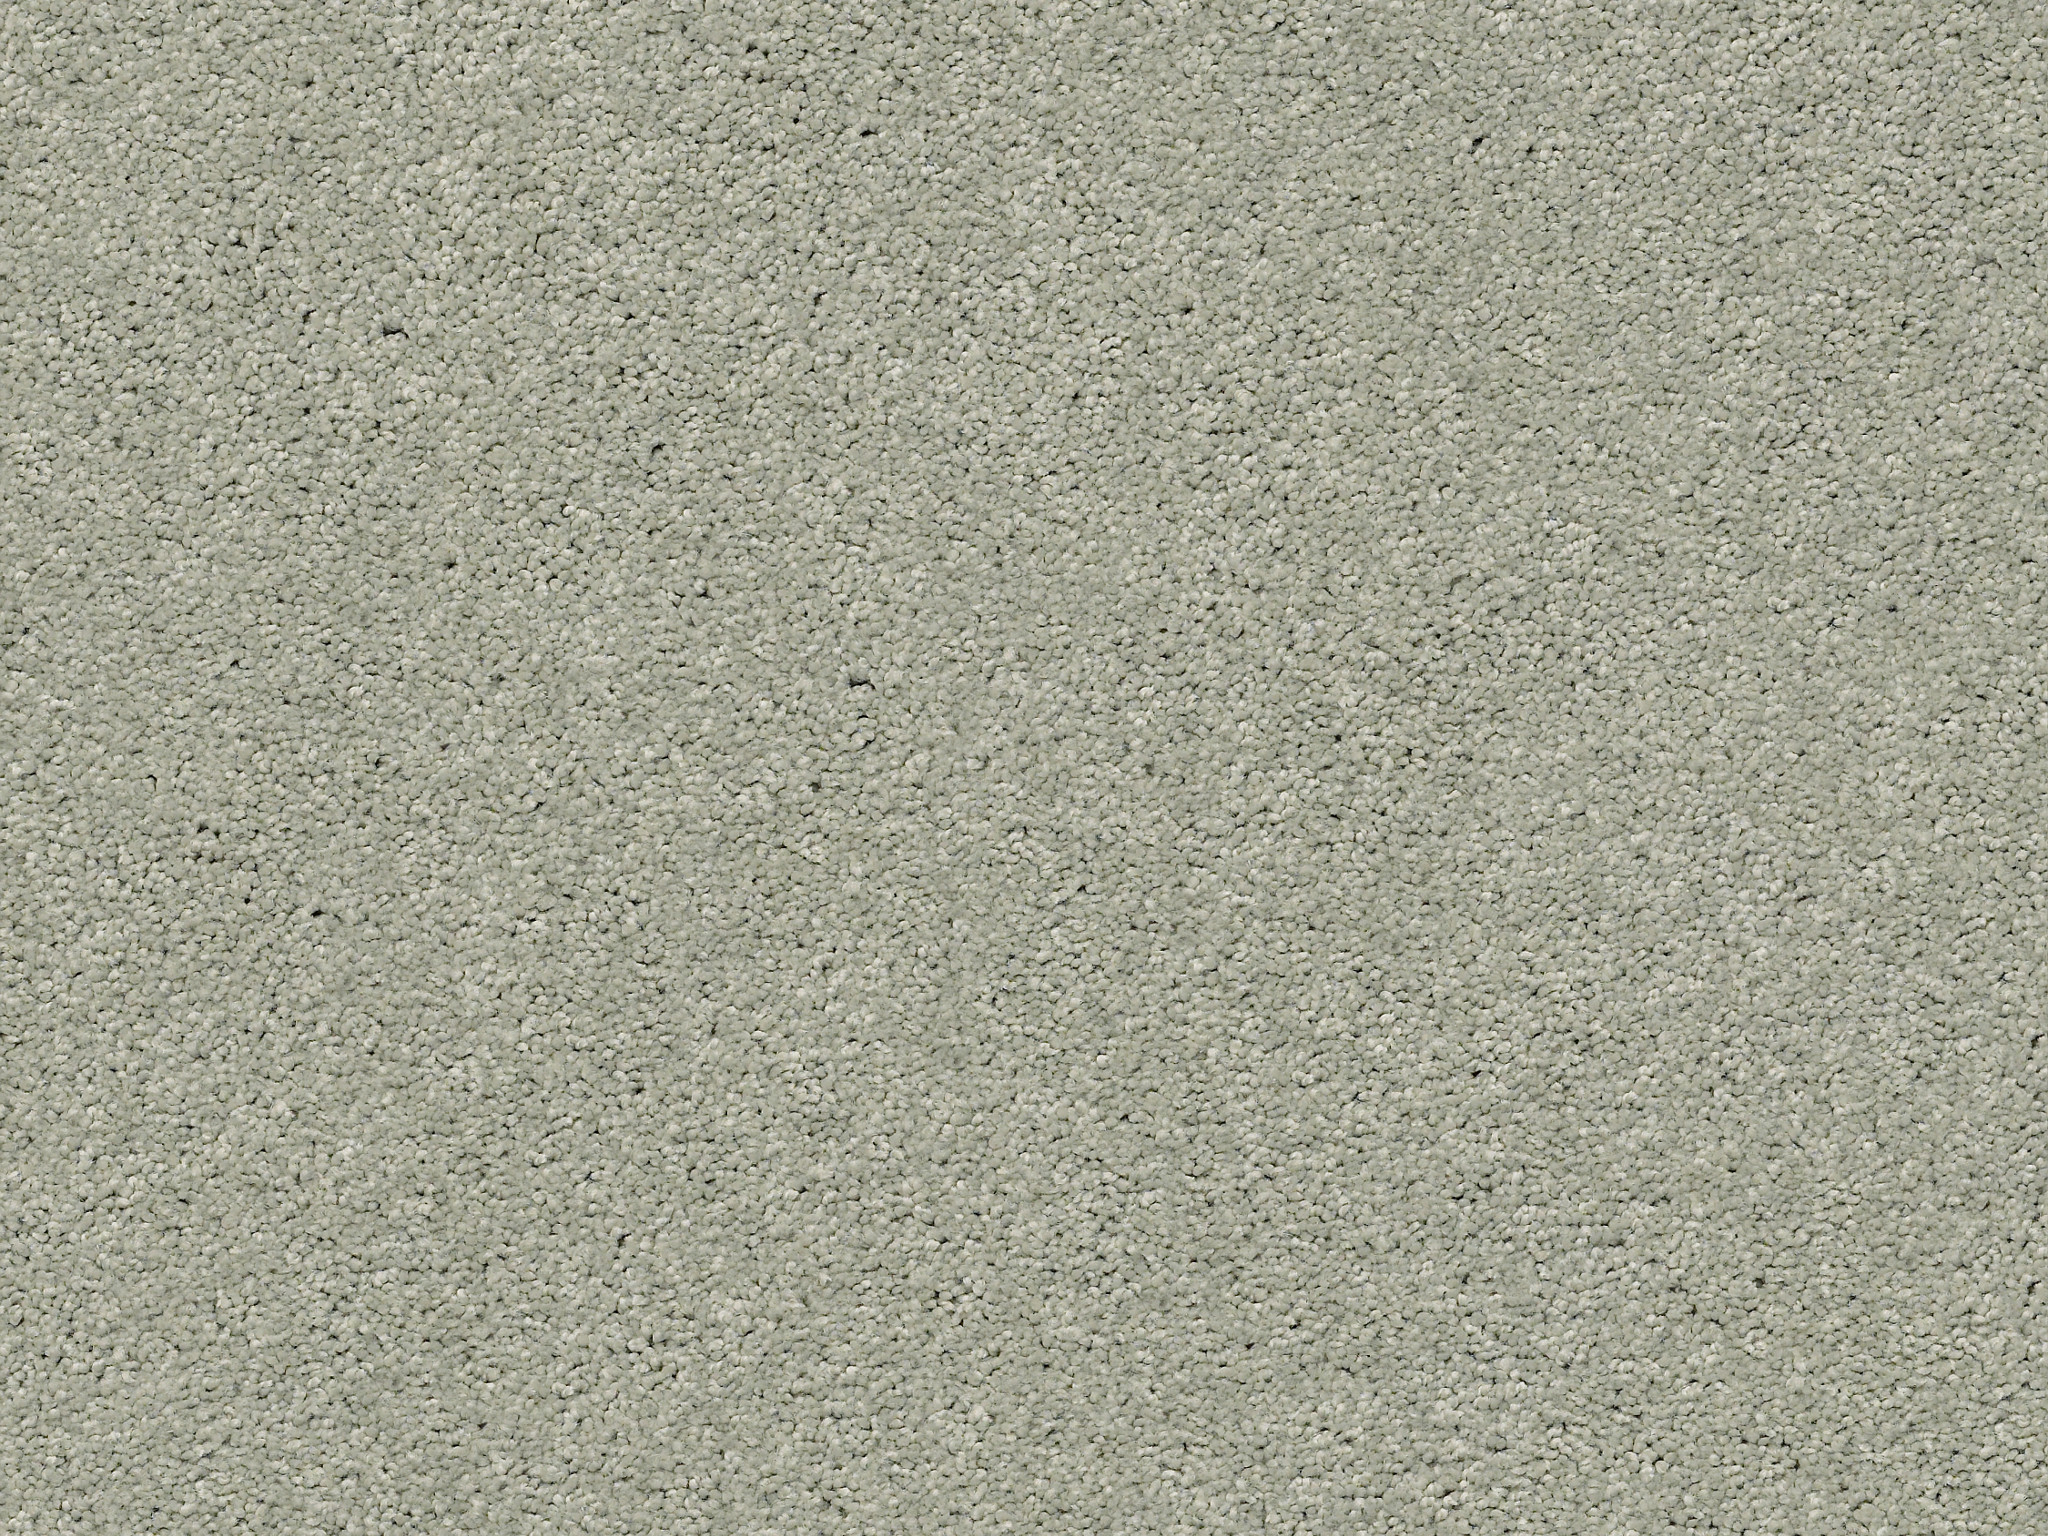 First Act Carpet - Rain Dance Zoomed Swatch Image